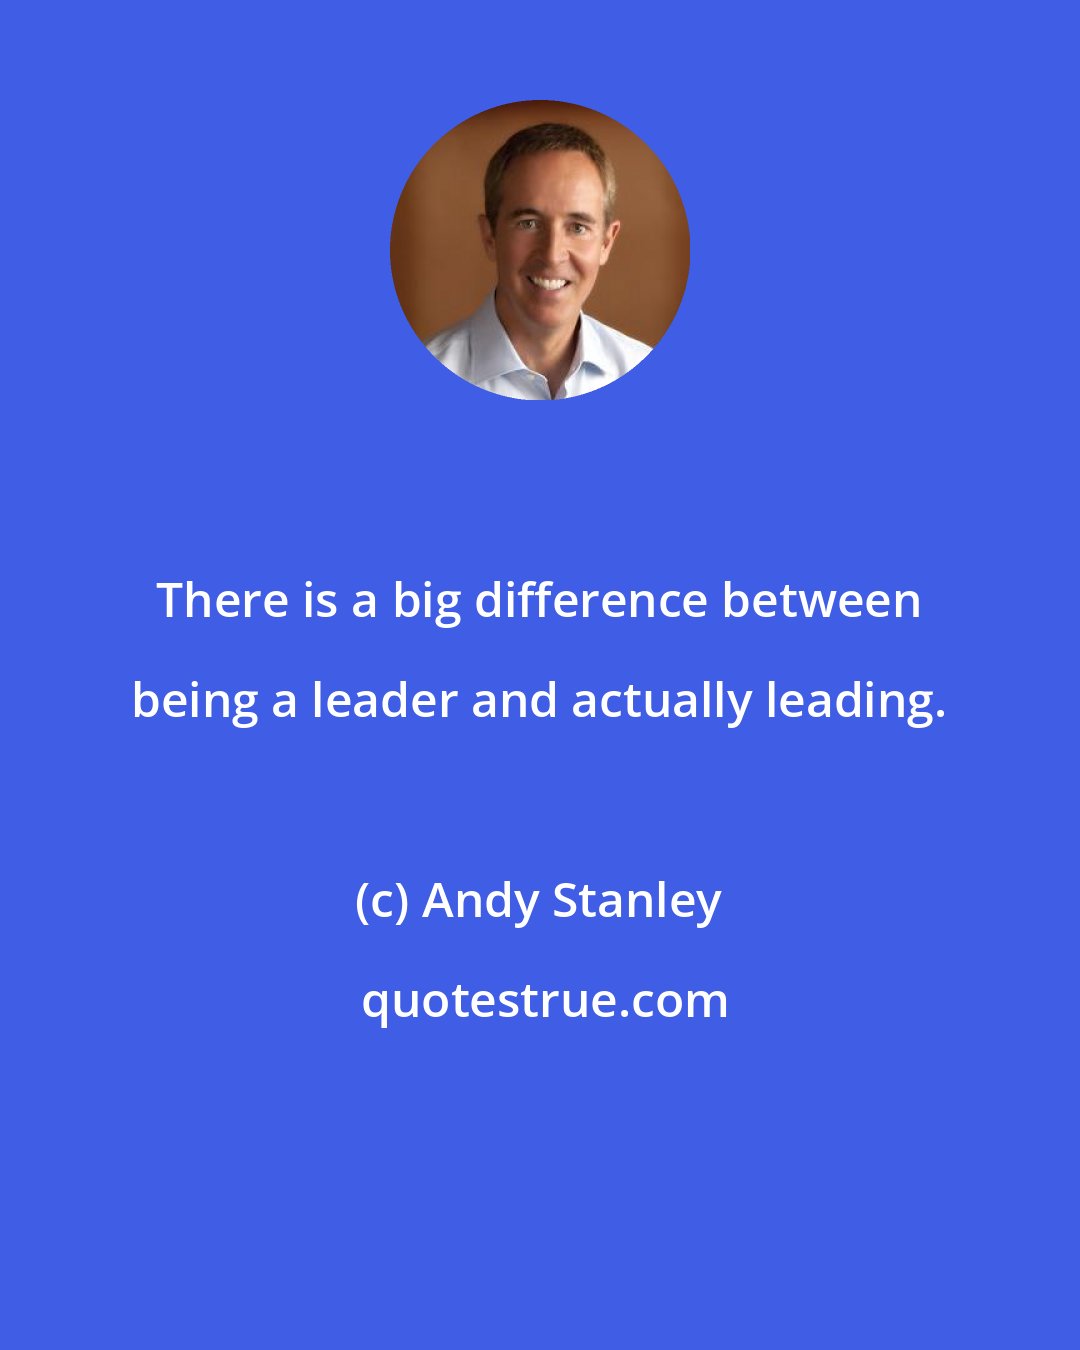 Andy Stanley: There is a big difference between being a leader and actually leading.